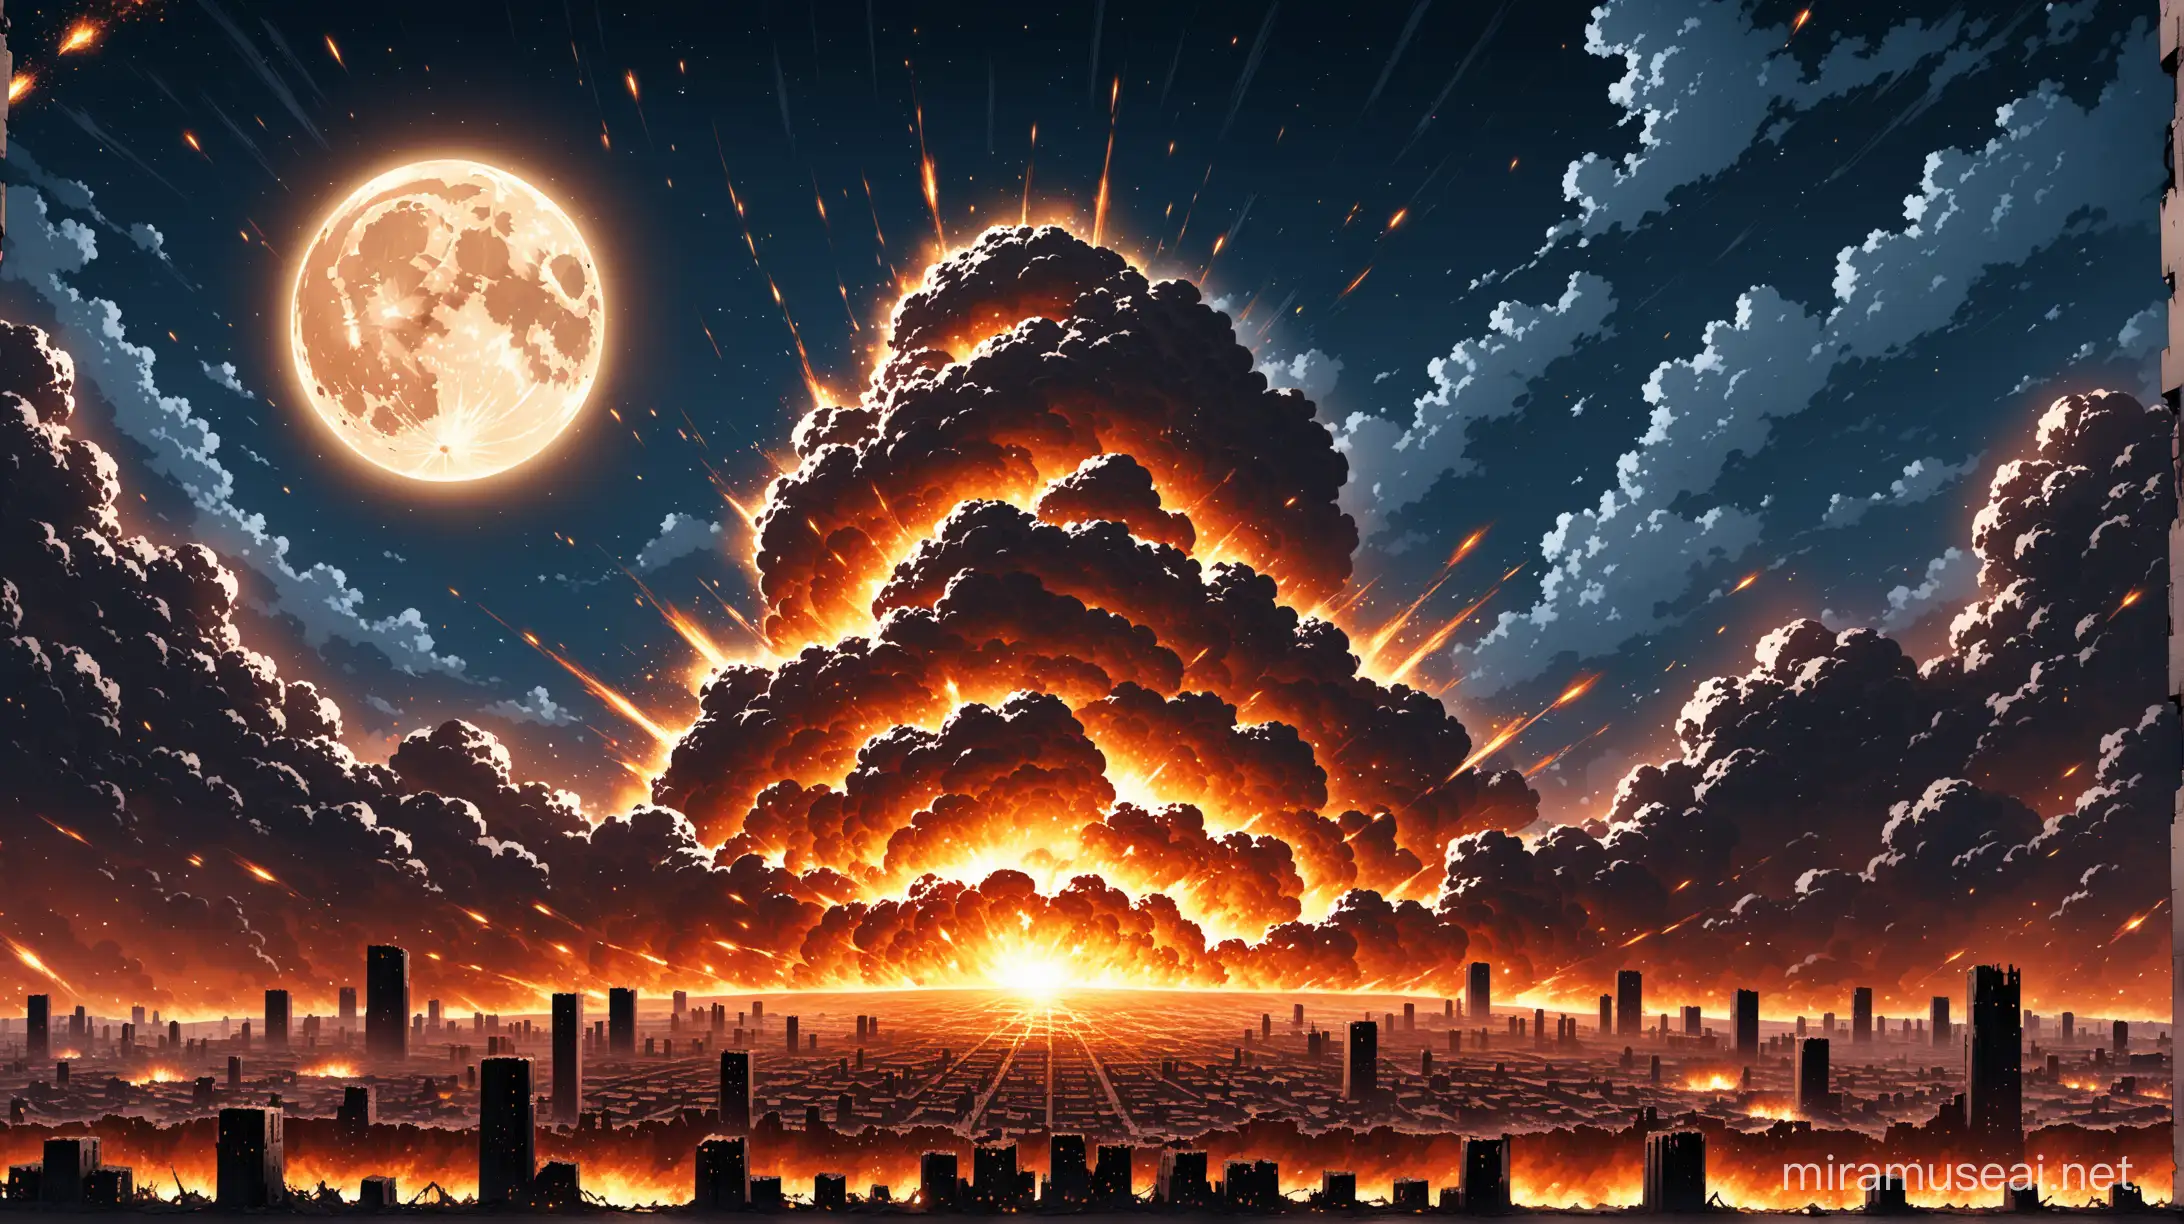 Moon Explosion Over Ruined City Computer Wallpaper